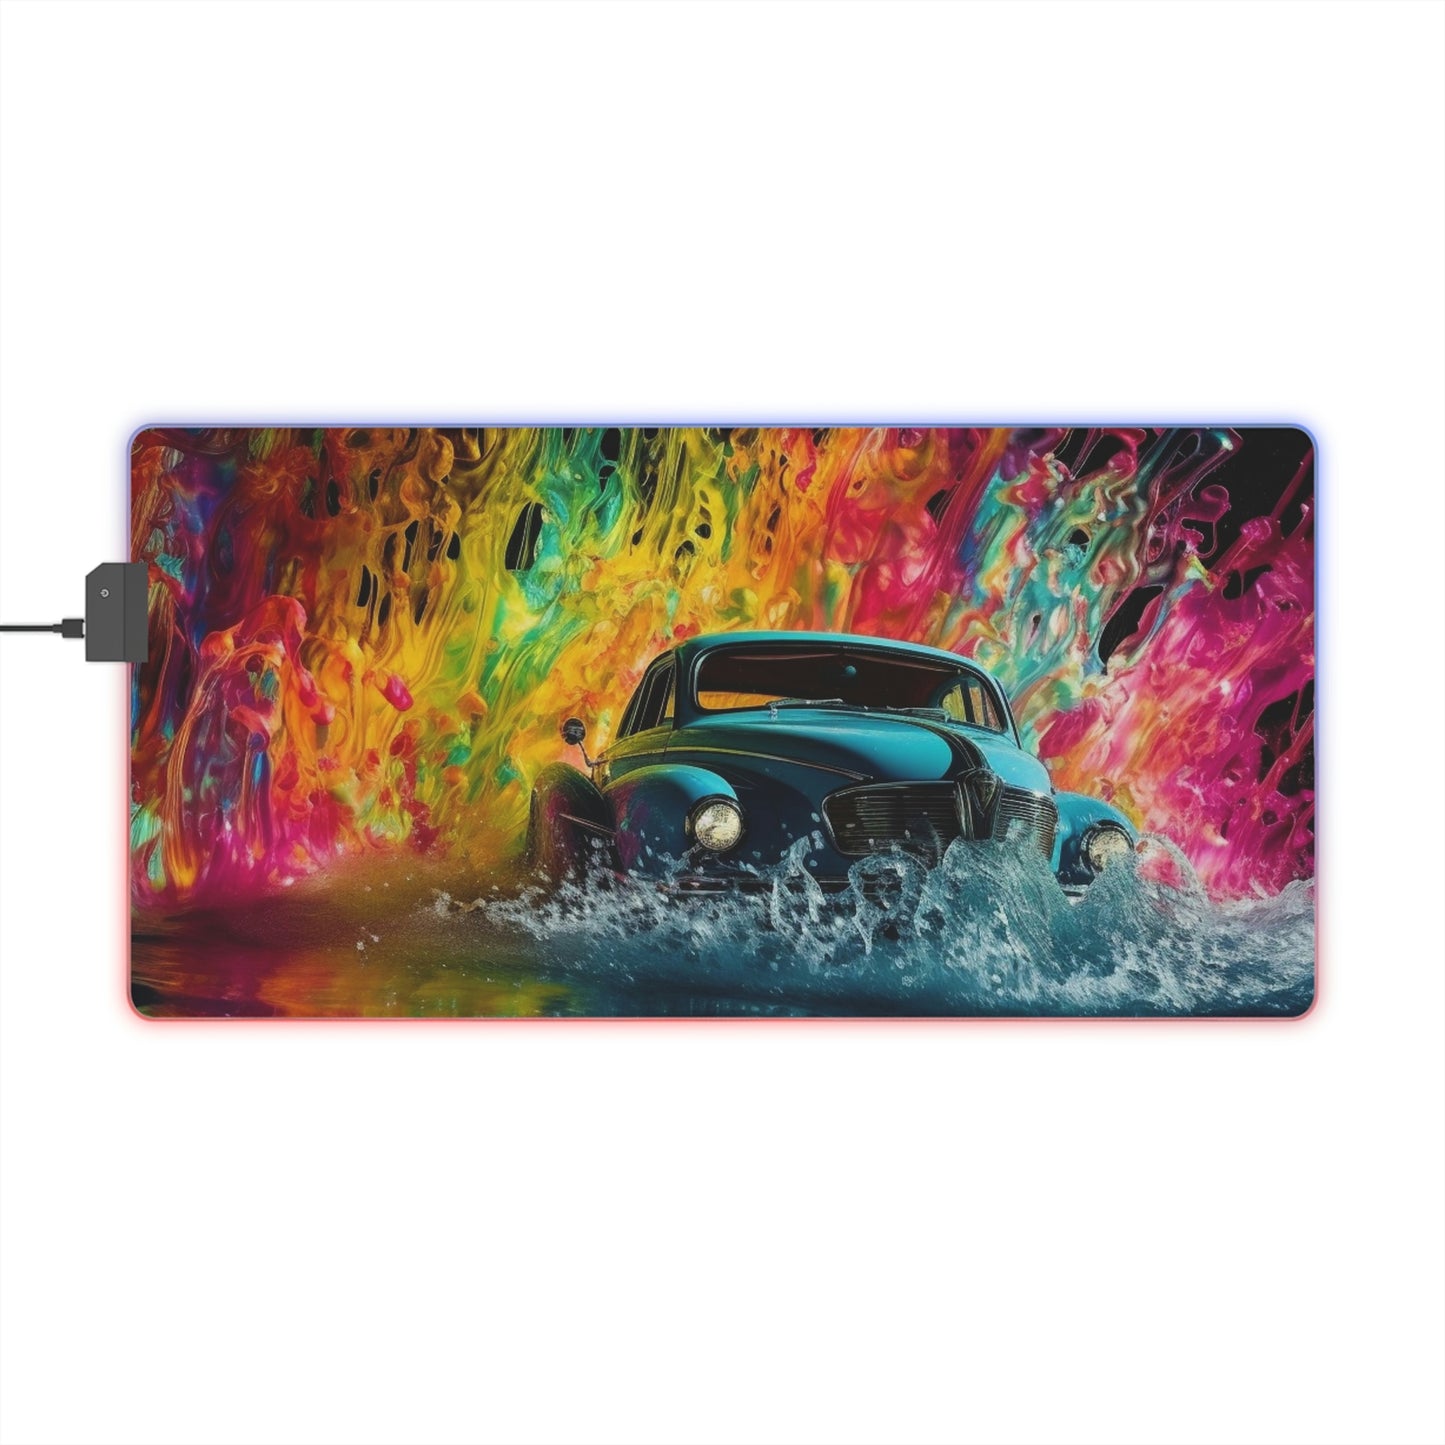 LED Gaming Mouse Pad Hotrod Water 1